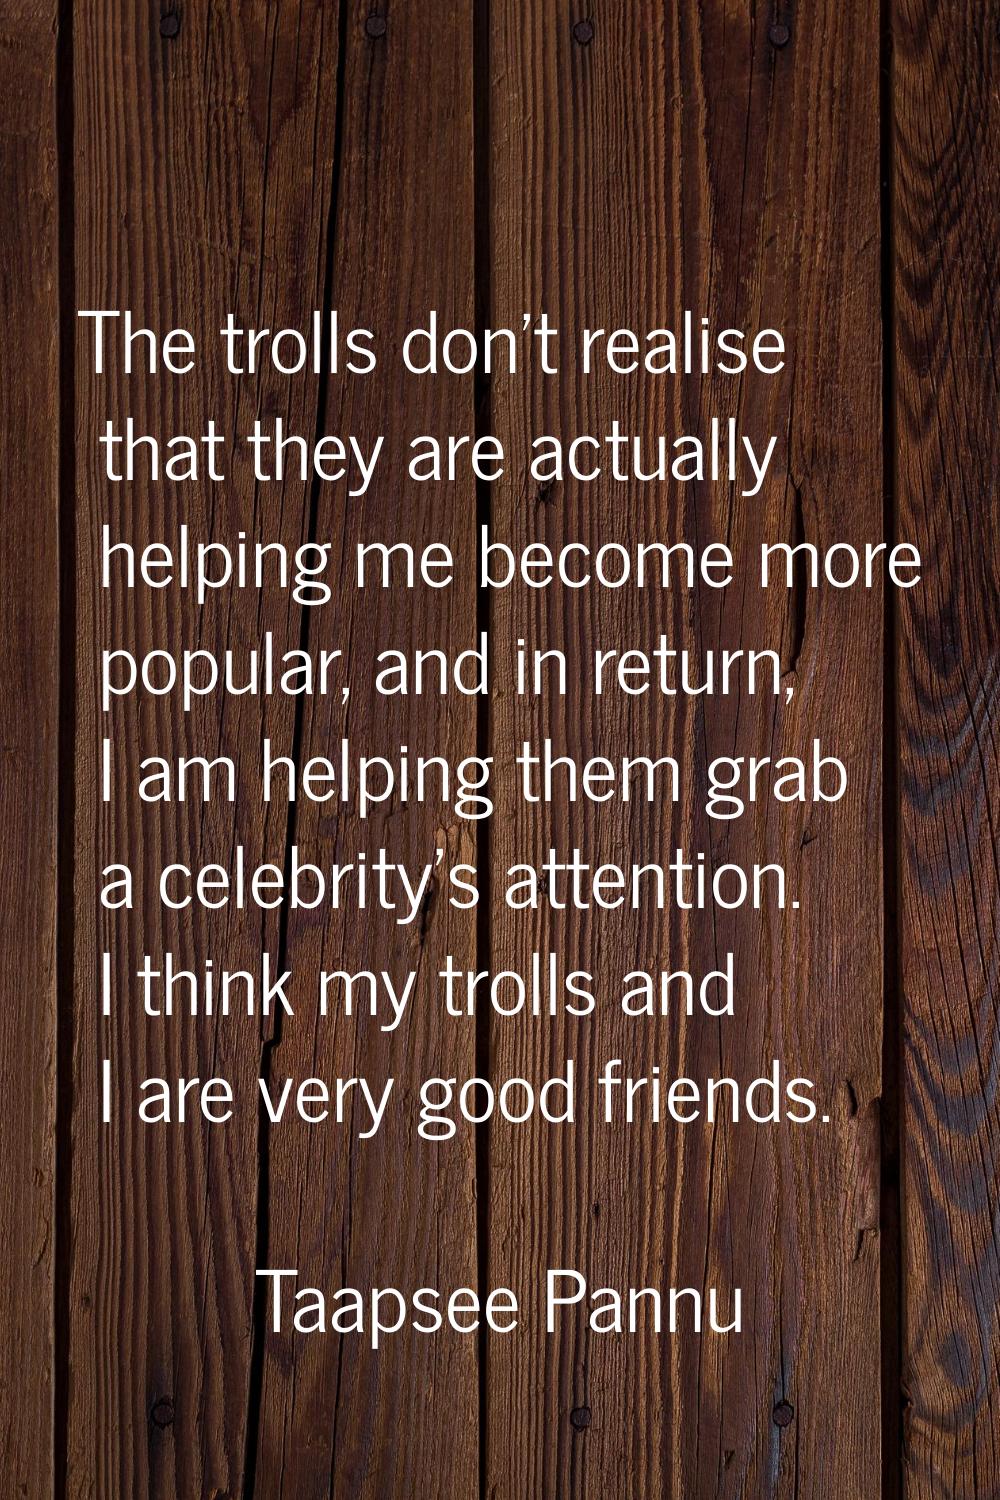 The trolls don't realise that they are actually helping me become more popular, and in return, I am